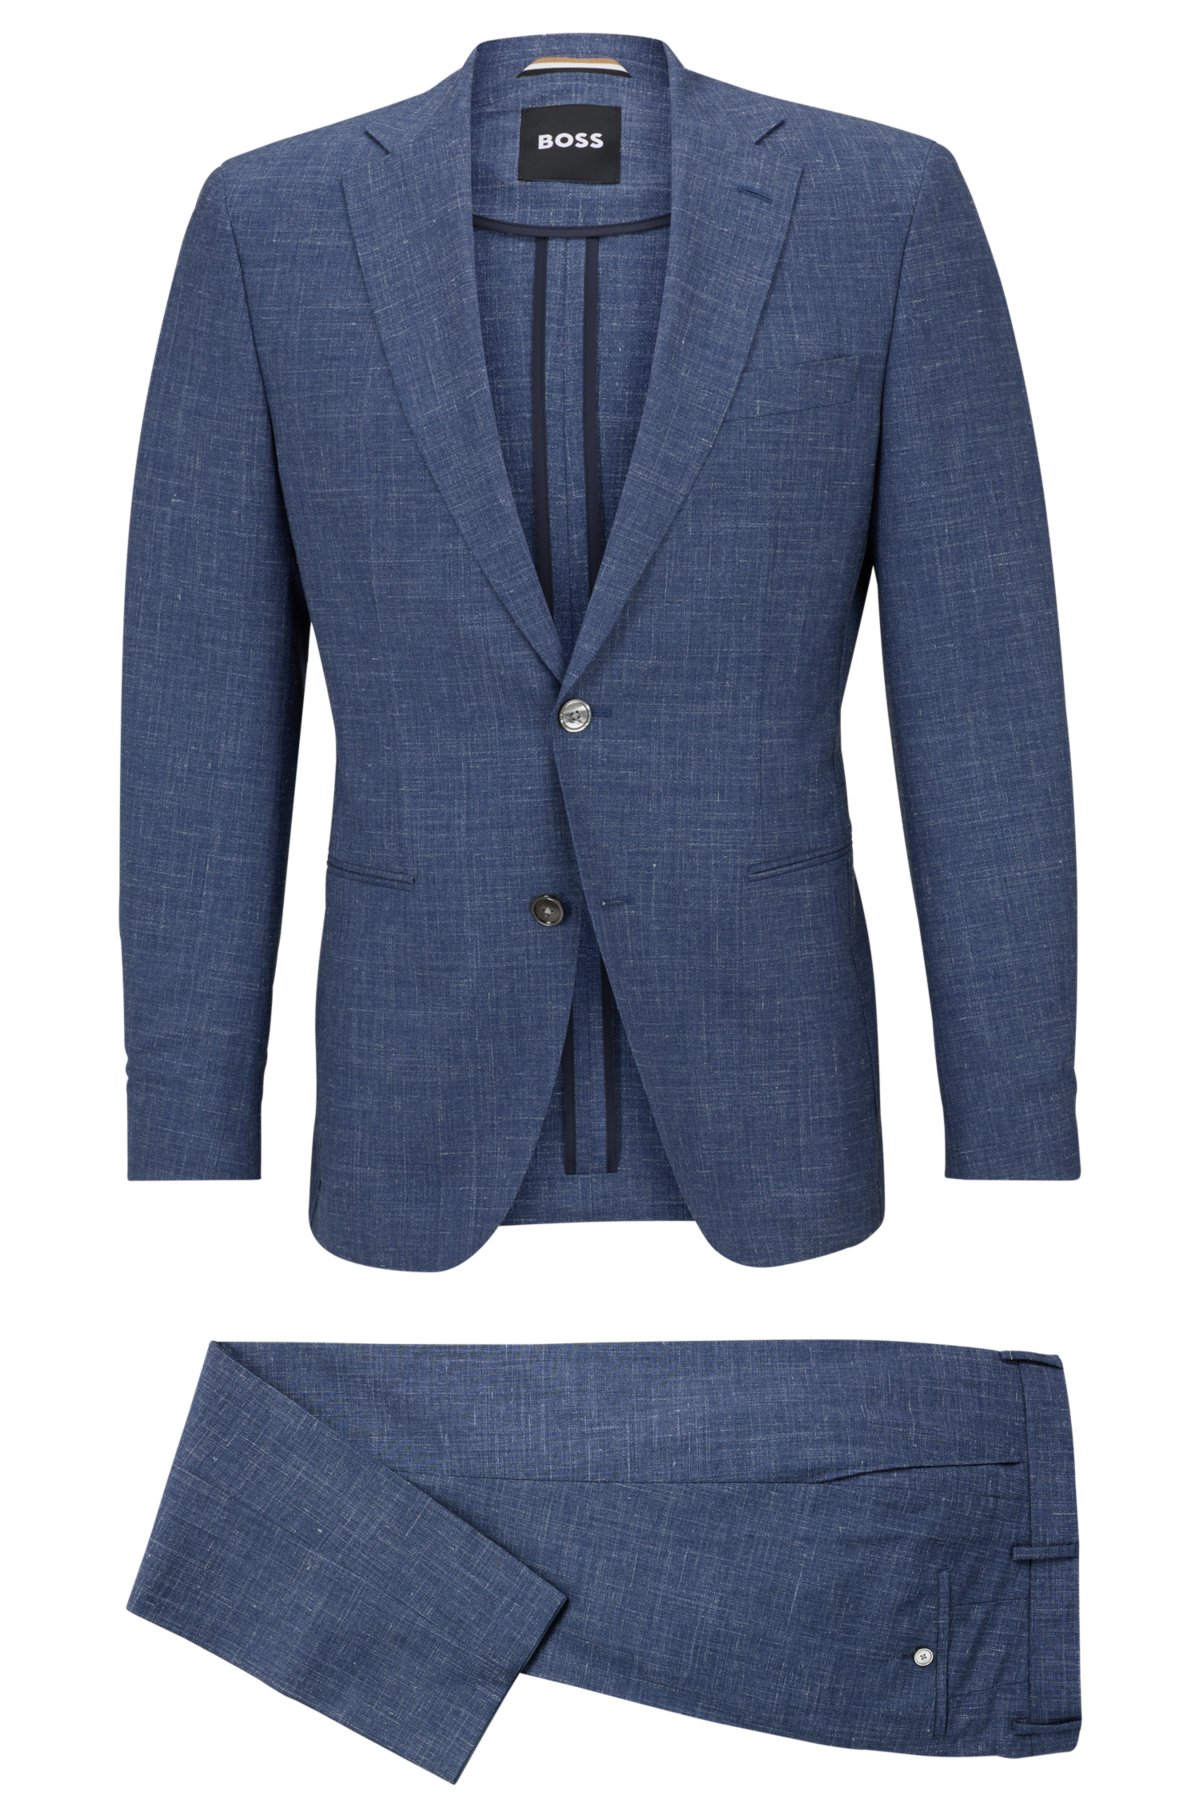 Slim-fit suit in wool, Tussah silk and linen, Blue